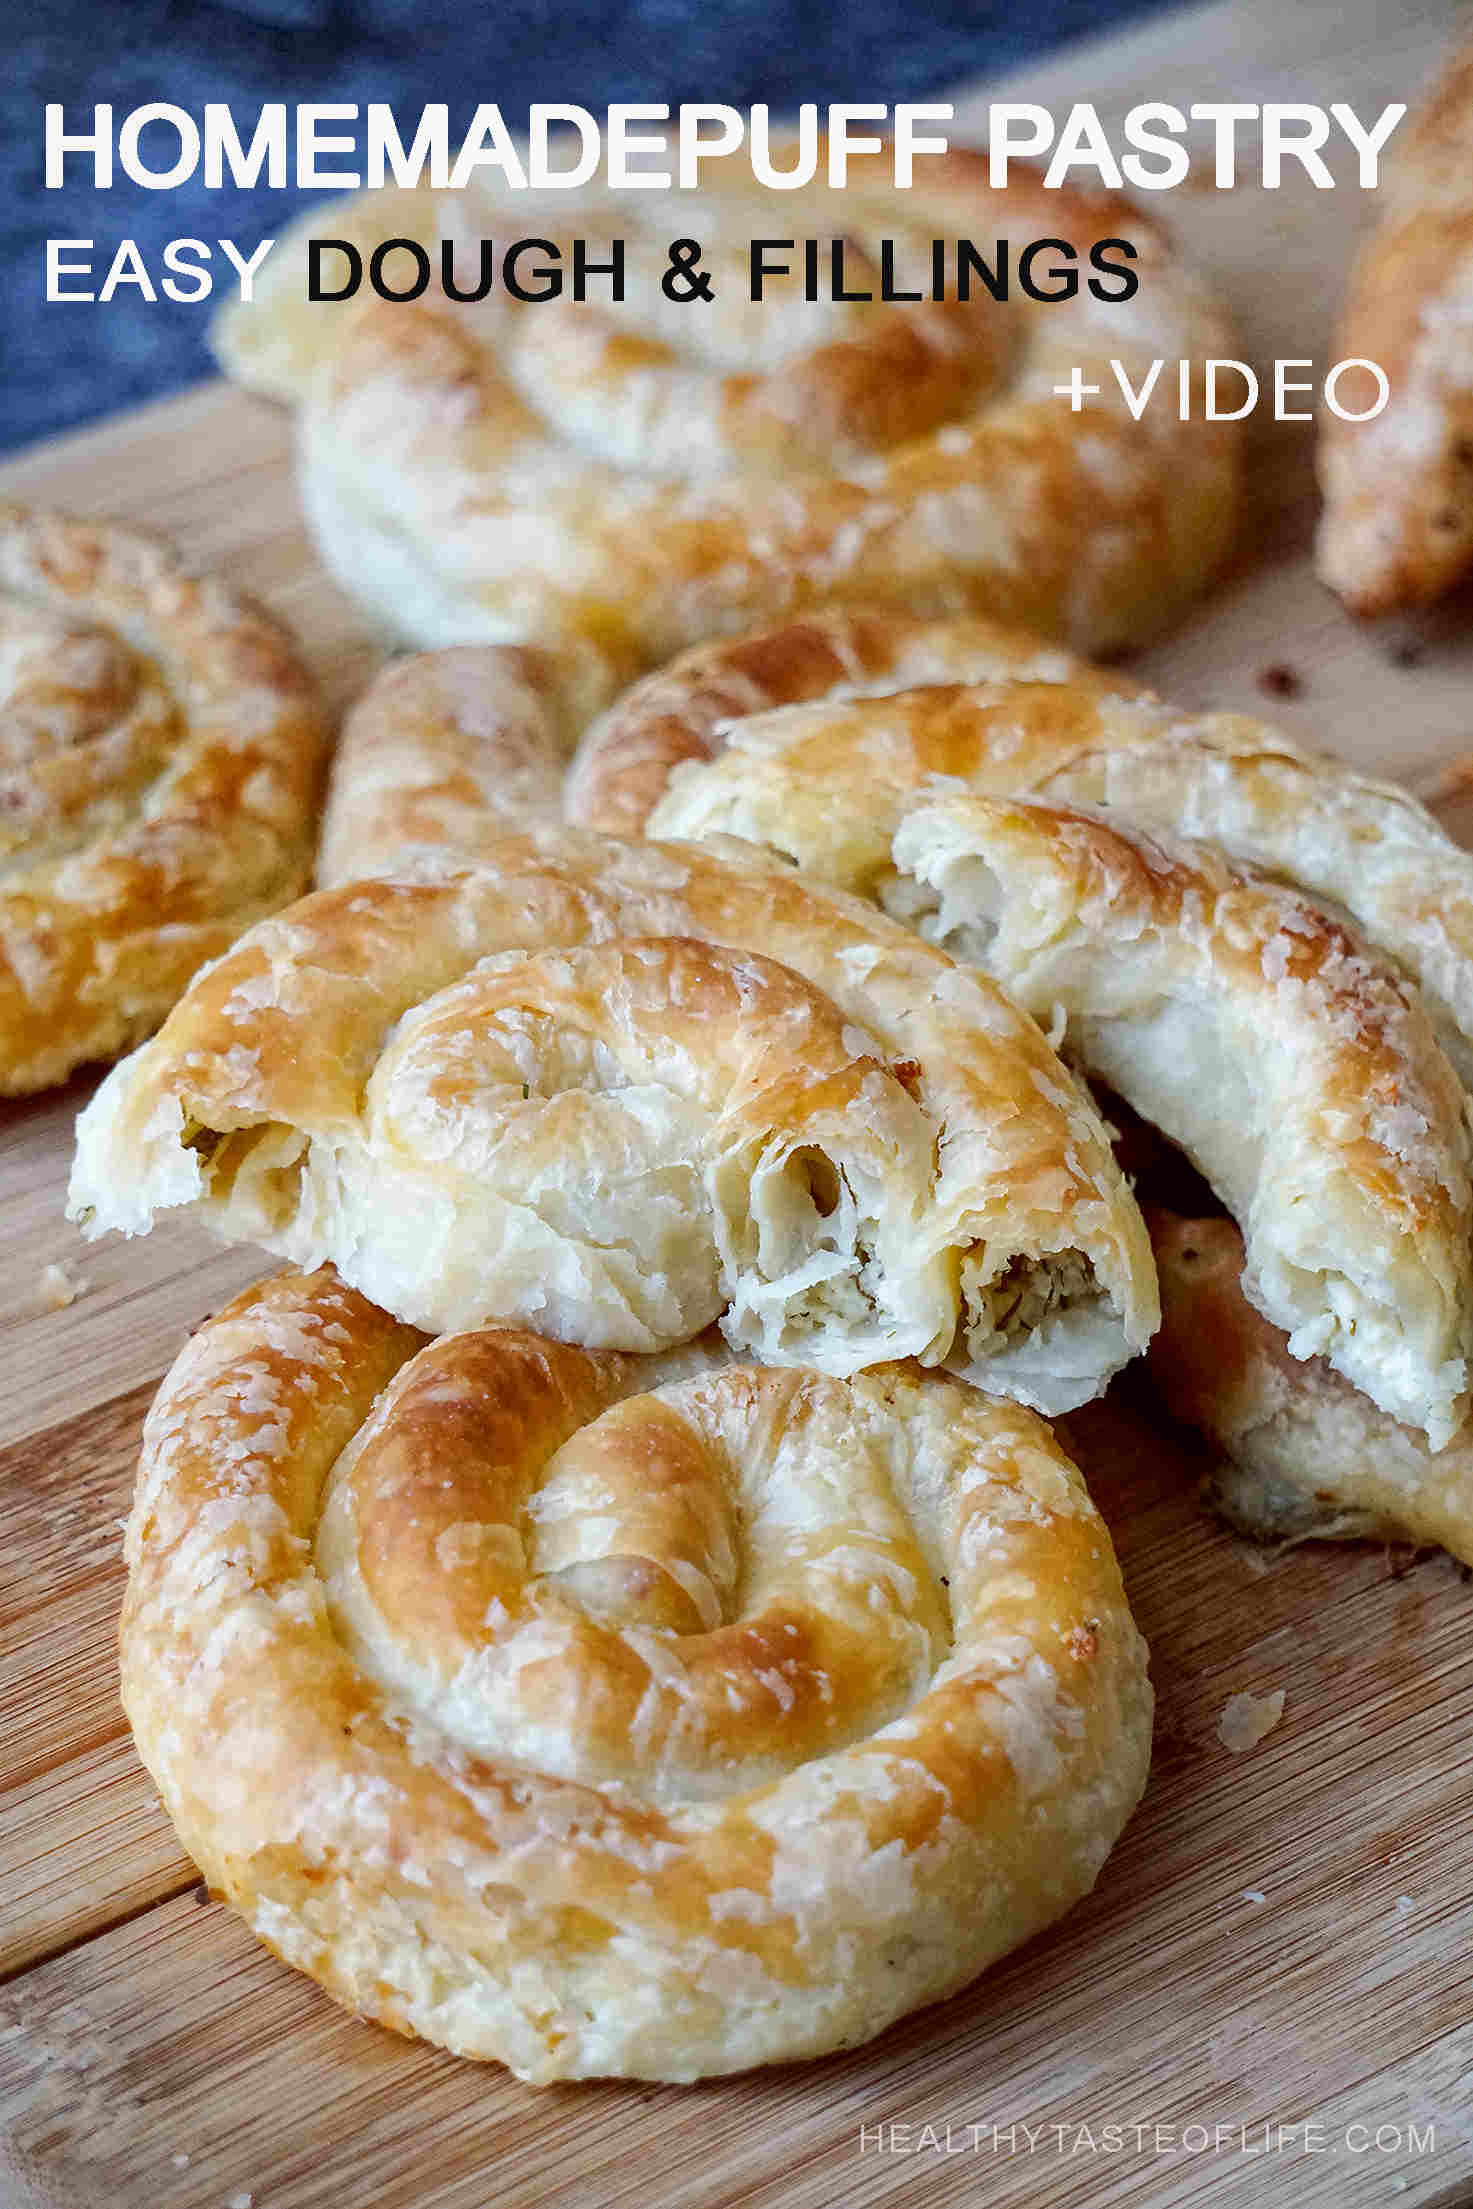 Puff pastry cheese rolls, puff pastry dough from scratch